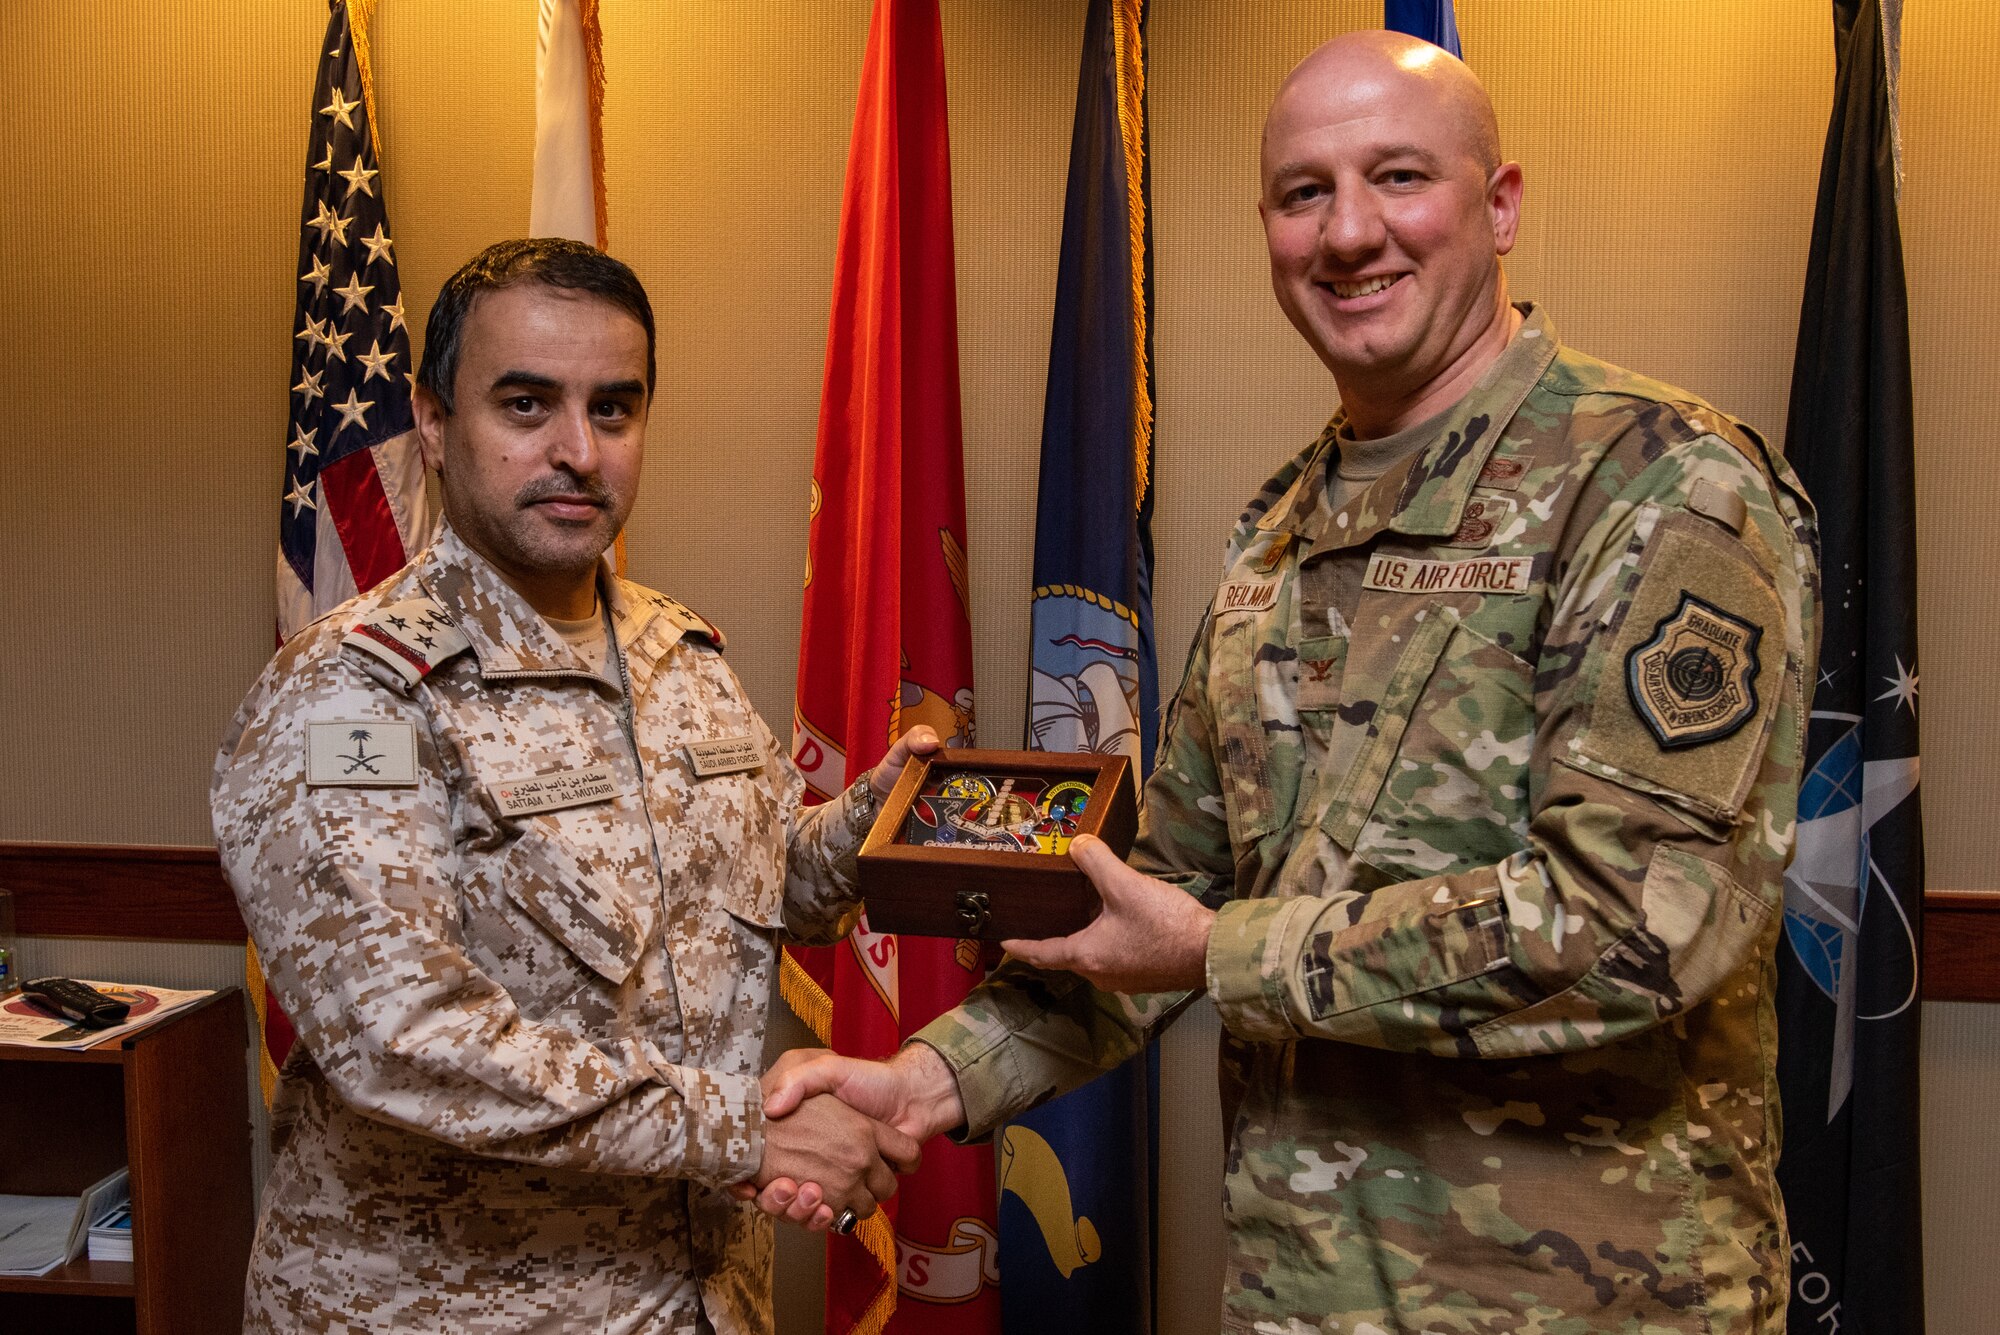 Royal Saudi Air Forces Commodore Al Mutairi Sattam Thaib, Armed Forces Intel and Security Institute commander, accepts a gift from U.S. Air Force Col. Matthew Reilman, 17th Training Wing commander, Goodfellow Air Force Base, May 18, 2022. Members of the RSAF visited Goodfellow AFB to learn about the joint and coalition forces intelligence, surveillance, and reconnaissance training provided by the 17th TRW.  (U.S. Air Force Photo by Senior Airman Michael Bowman)